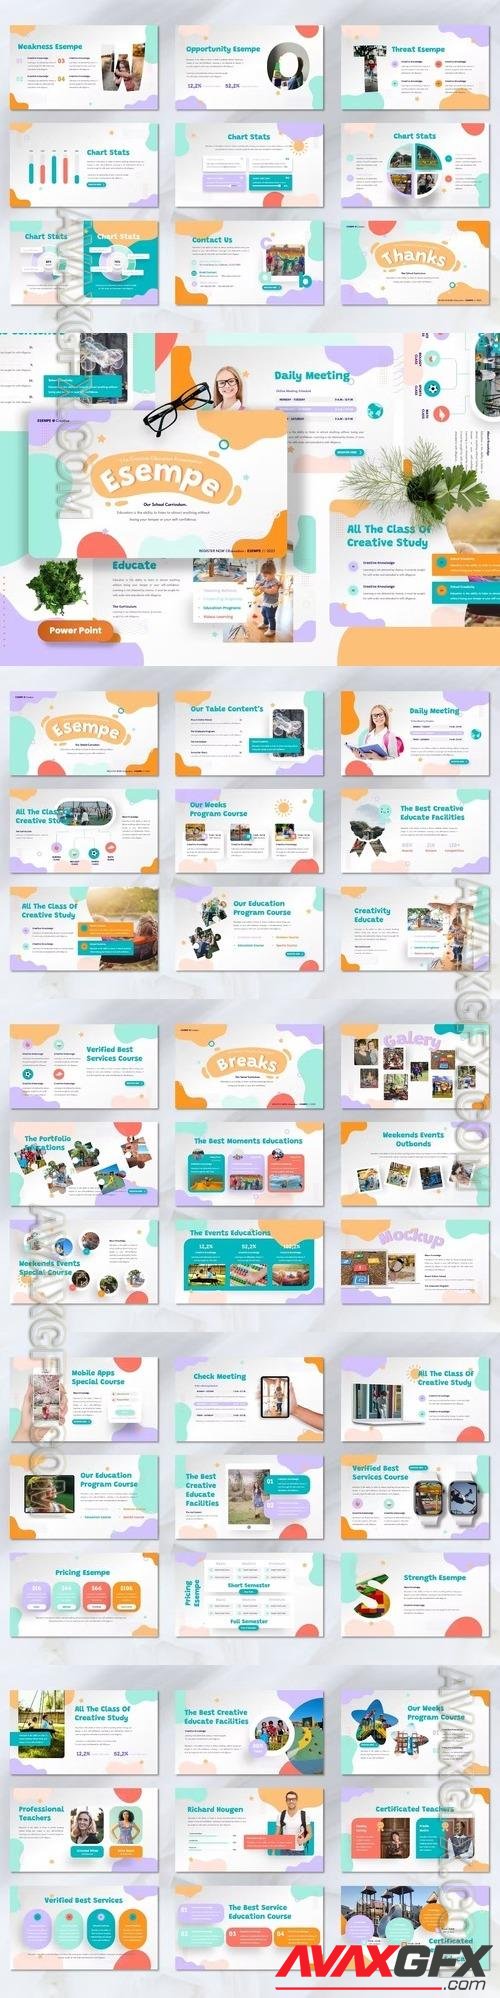 Esempe - Education Creative Powerpoint, Keynote and Google Slides Template